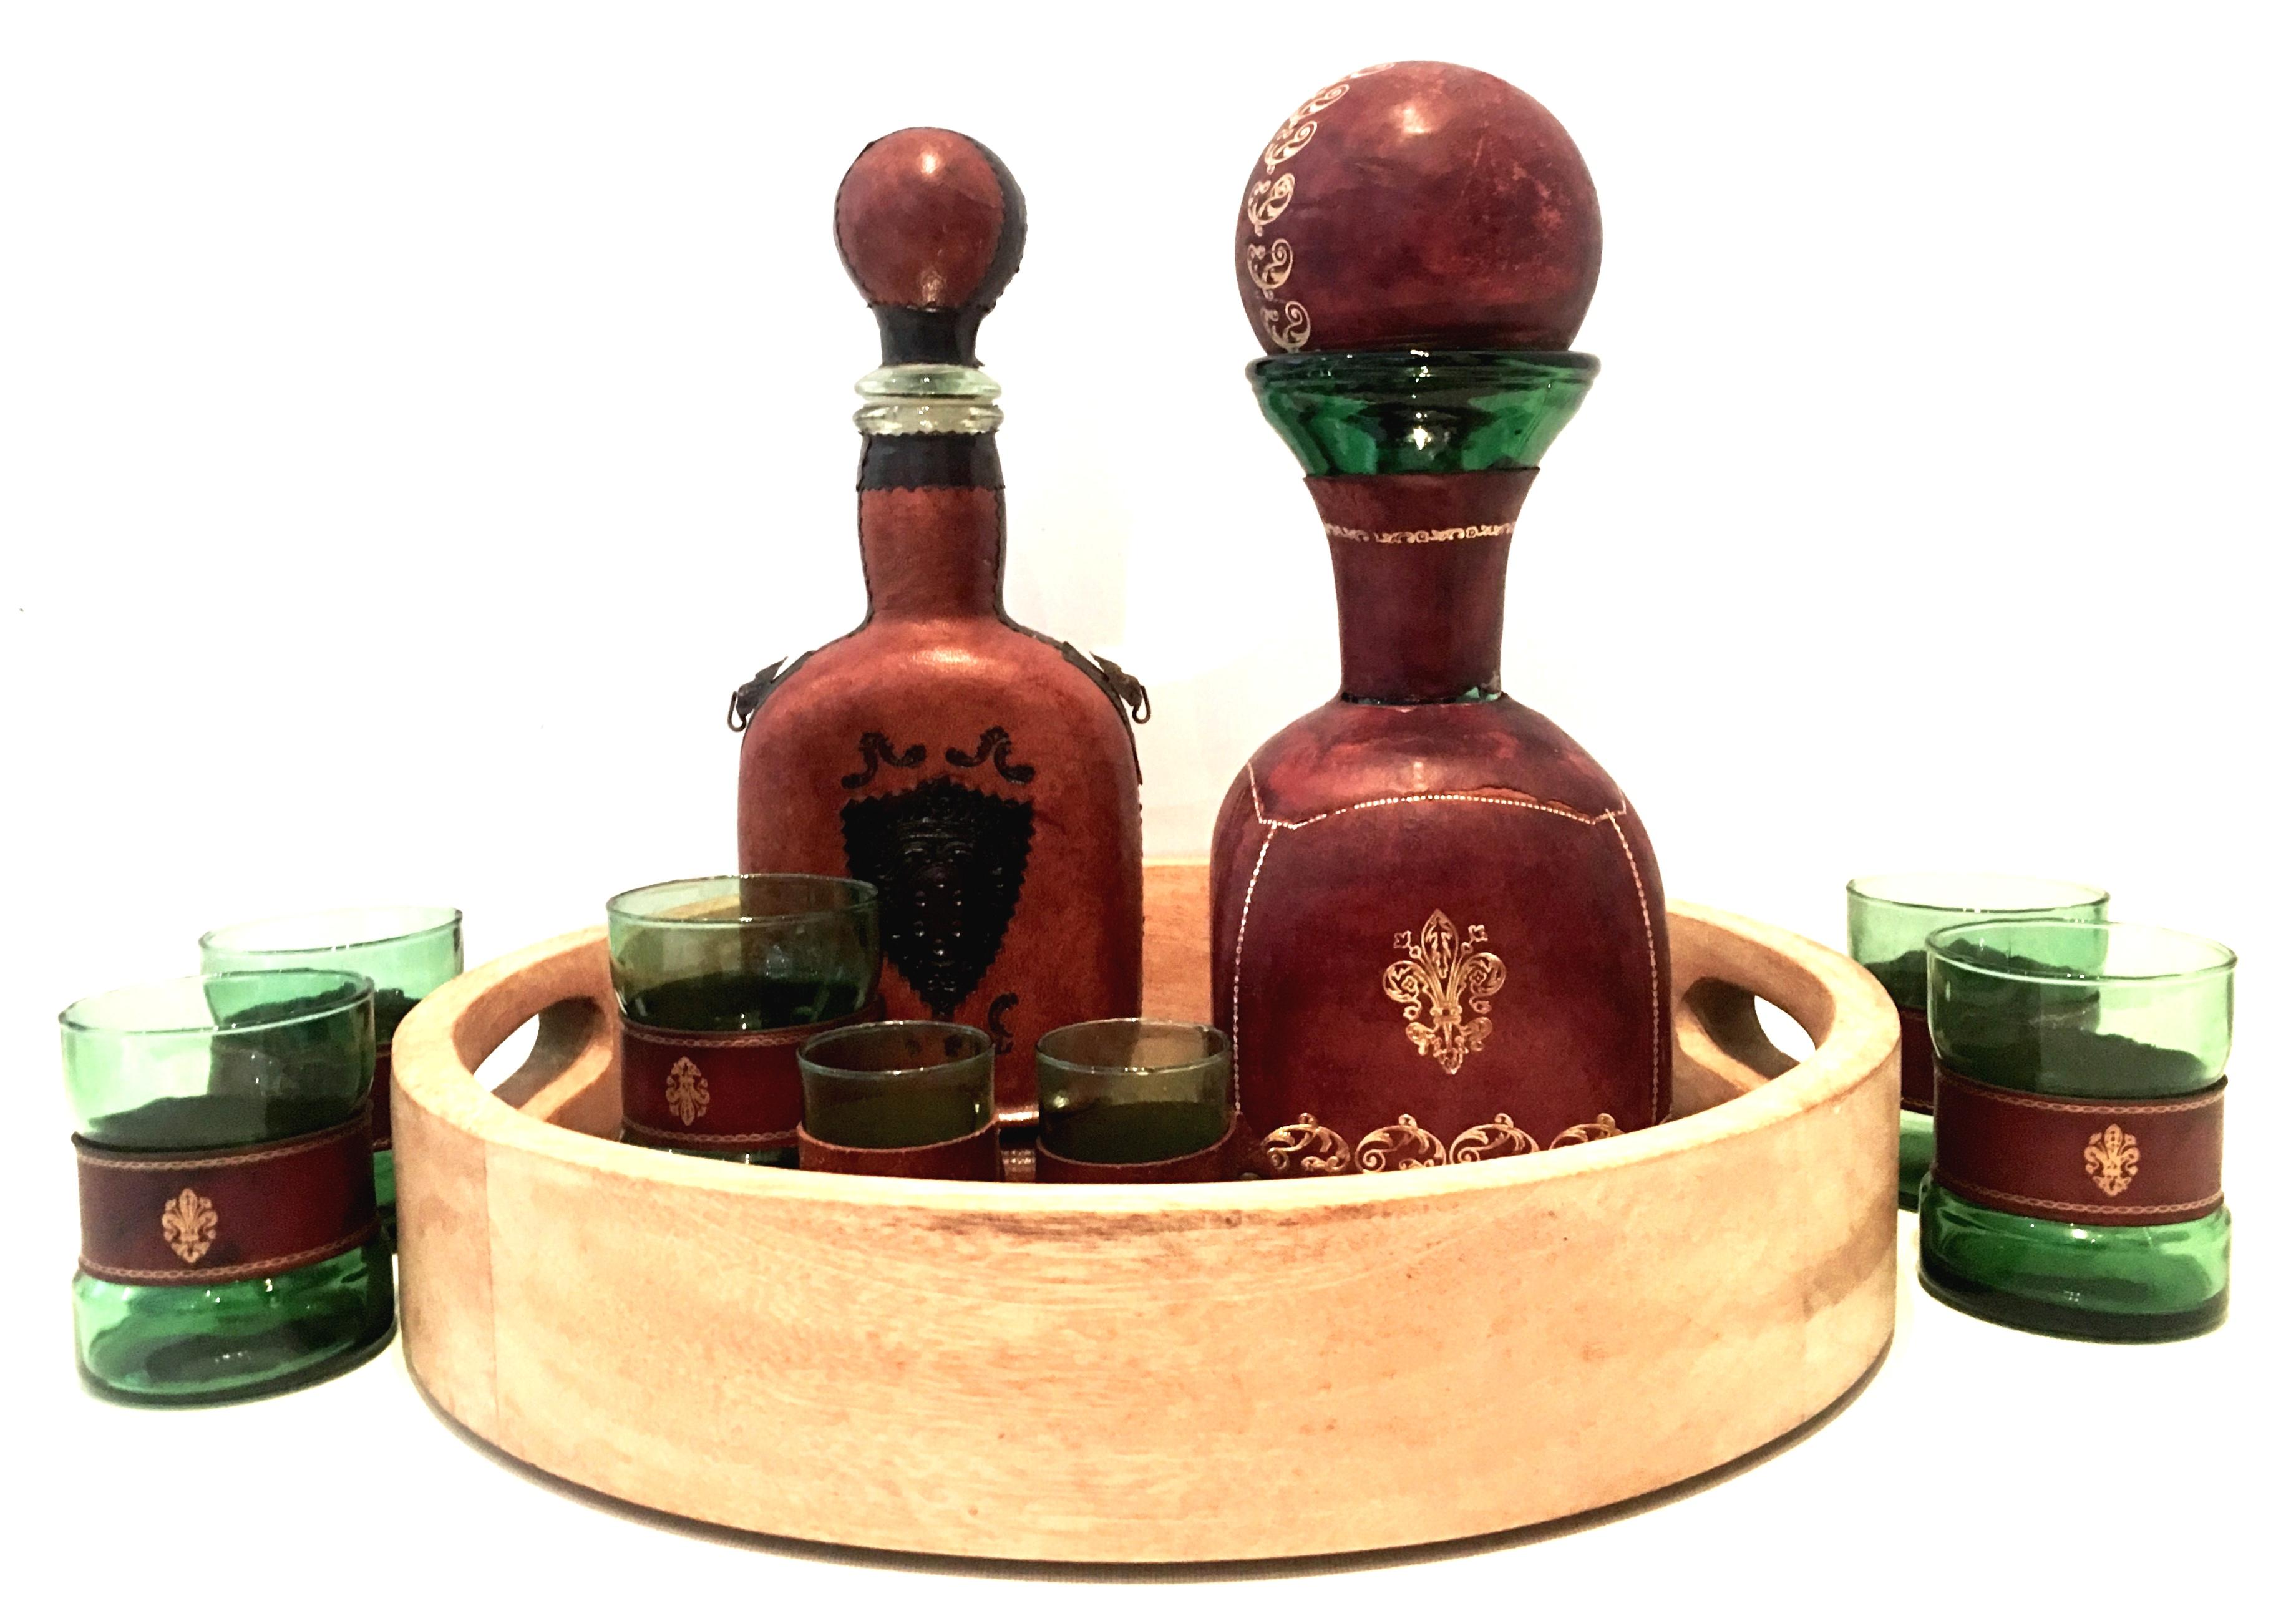 Mid-20th century Italian blown glass and leather drinks set of 10 pieces. Set features emerald green blown glass, Italian soft and durable leather wrapped decanters and glasses with a new wood and mirrored cut out handle tray. Set includes two